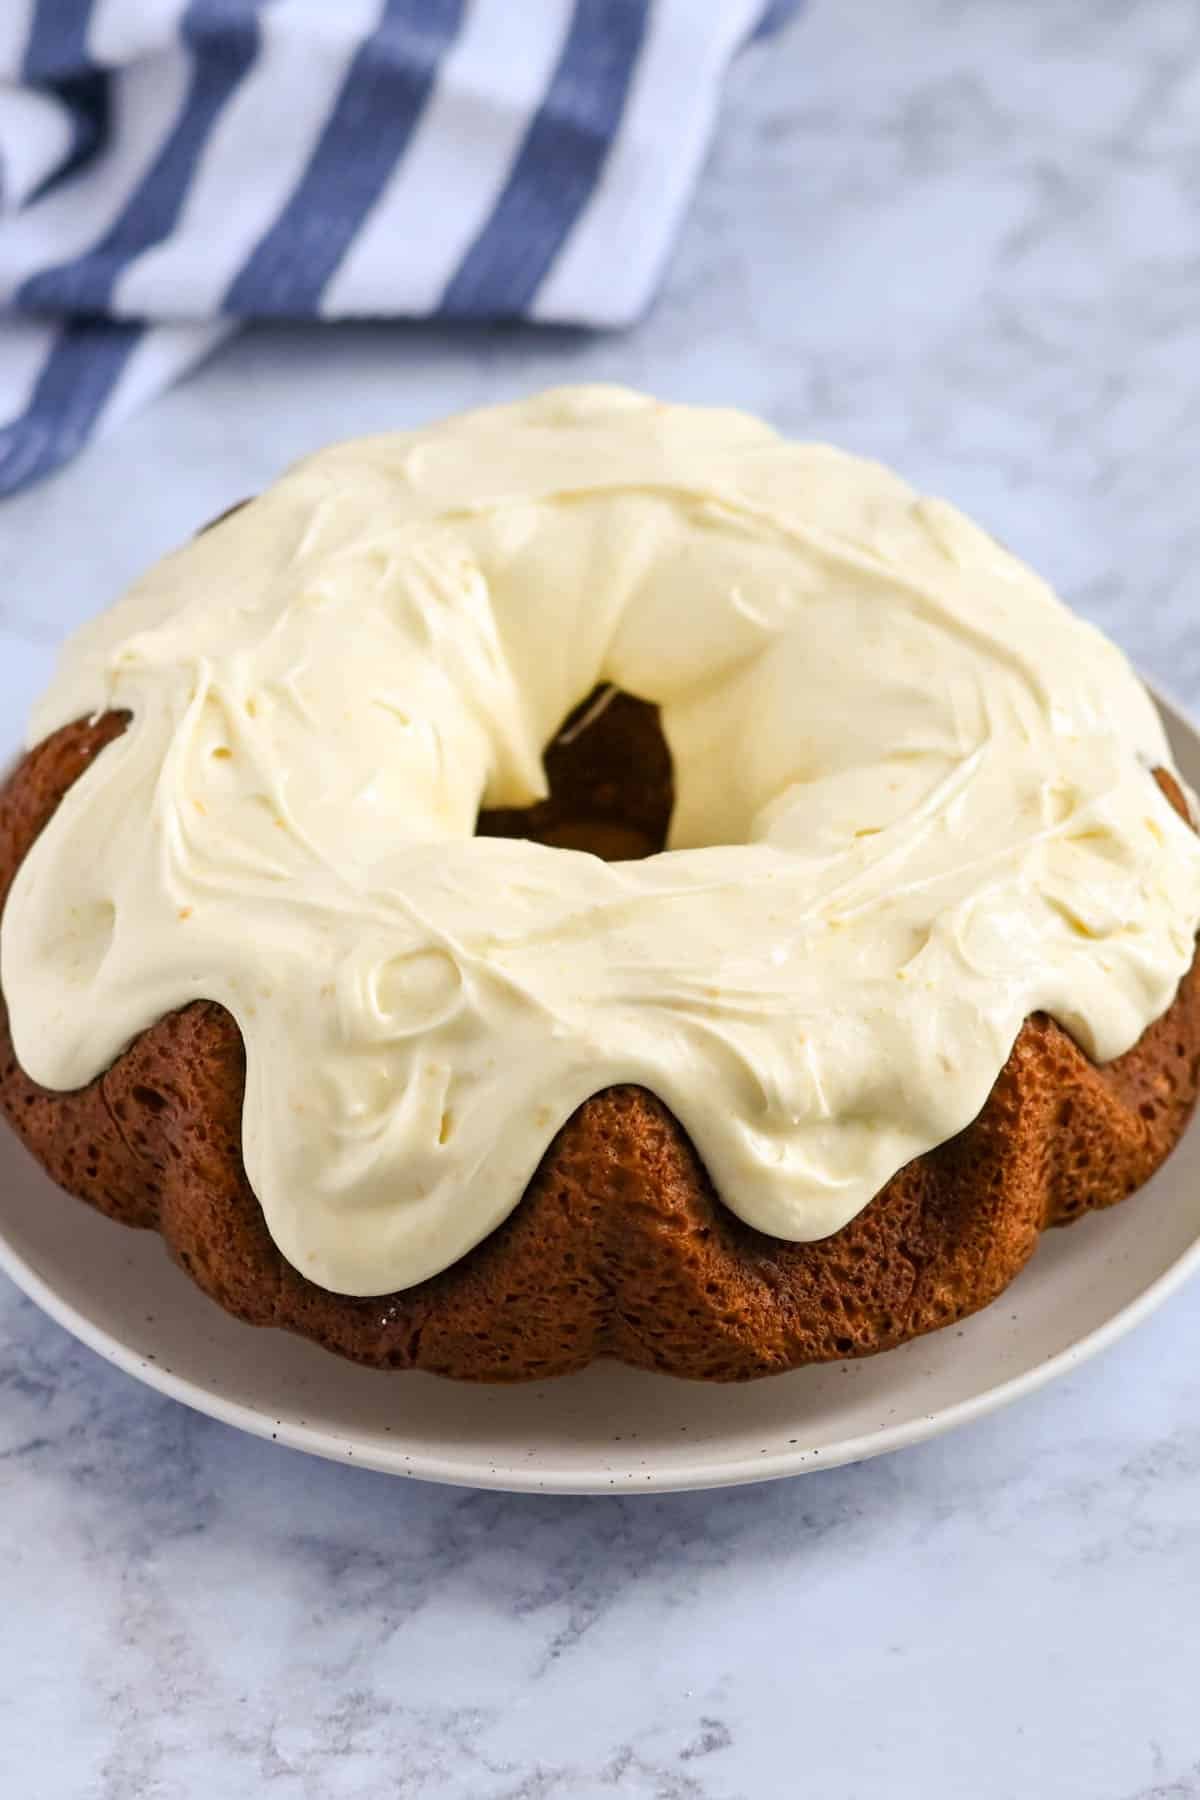 A Bundt cake with cream cheese frosting sits on a white plate on a marble surface, with a blue and white striped cloth in the background.